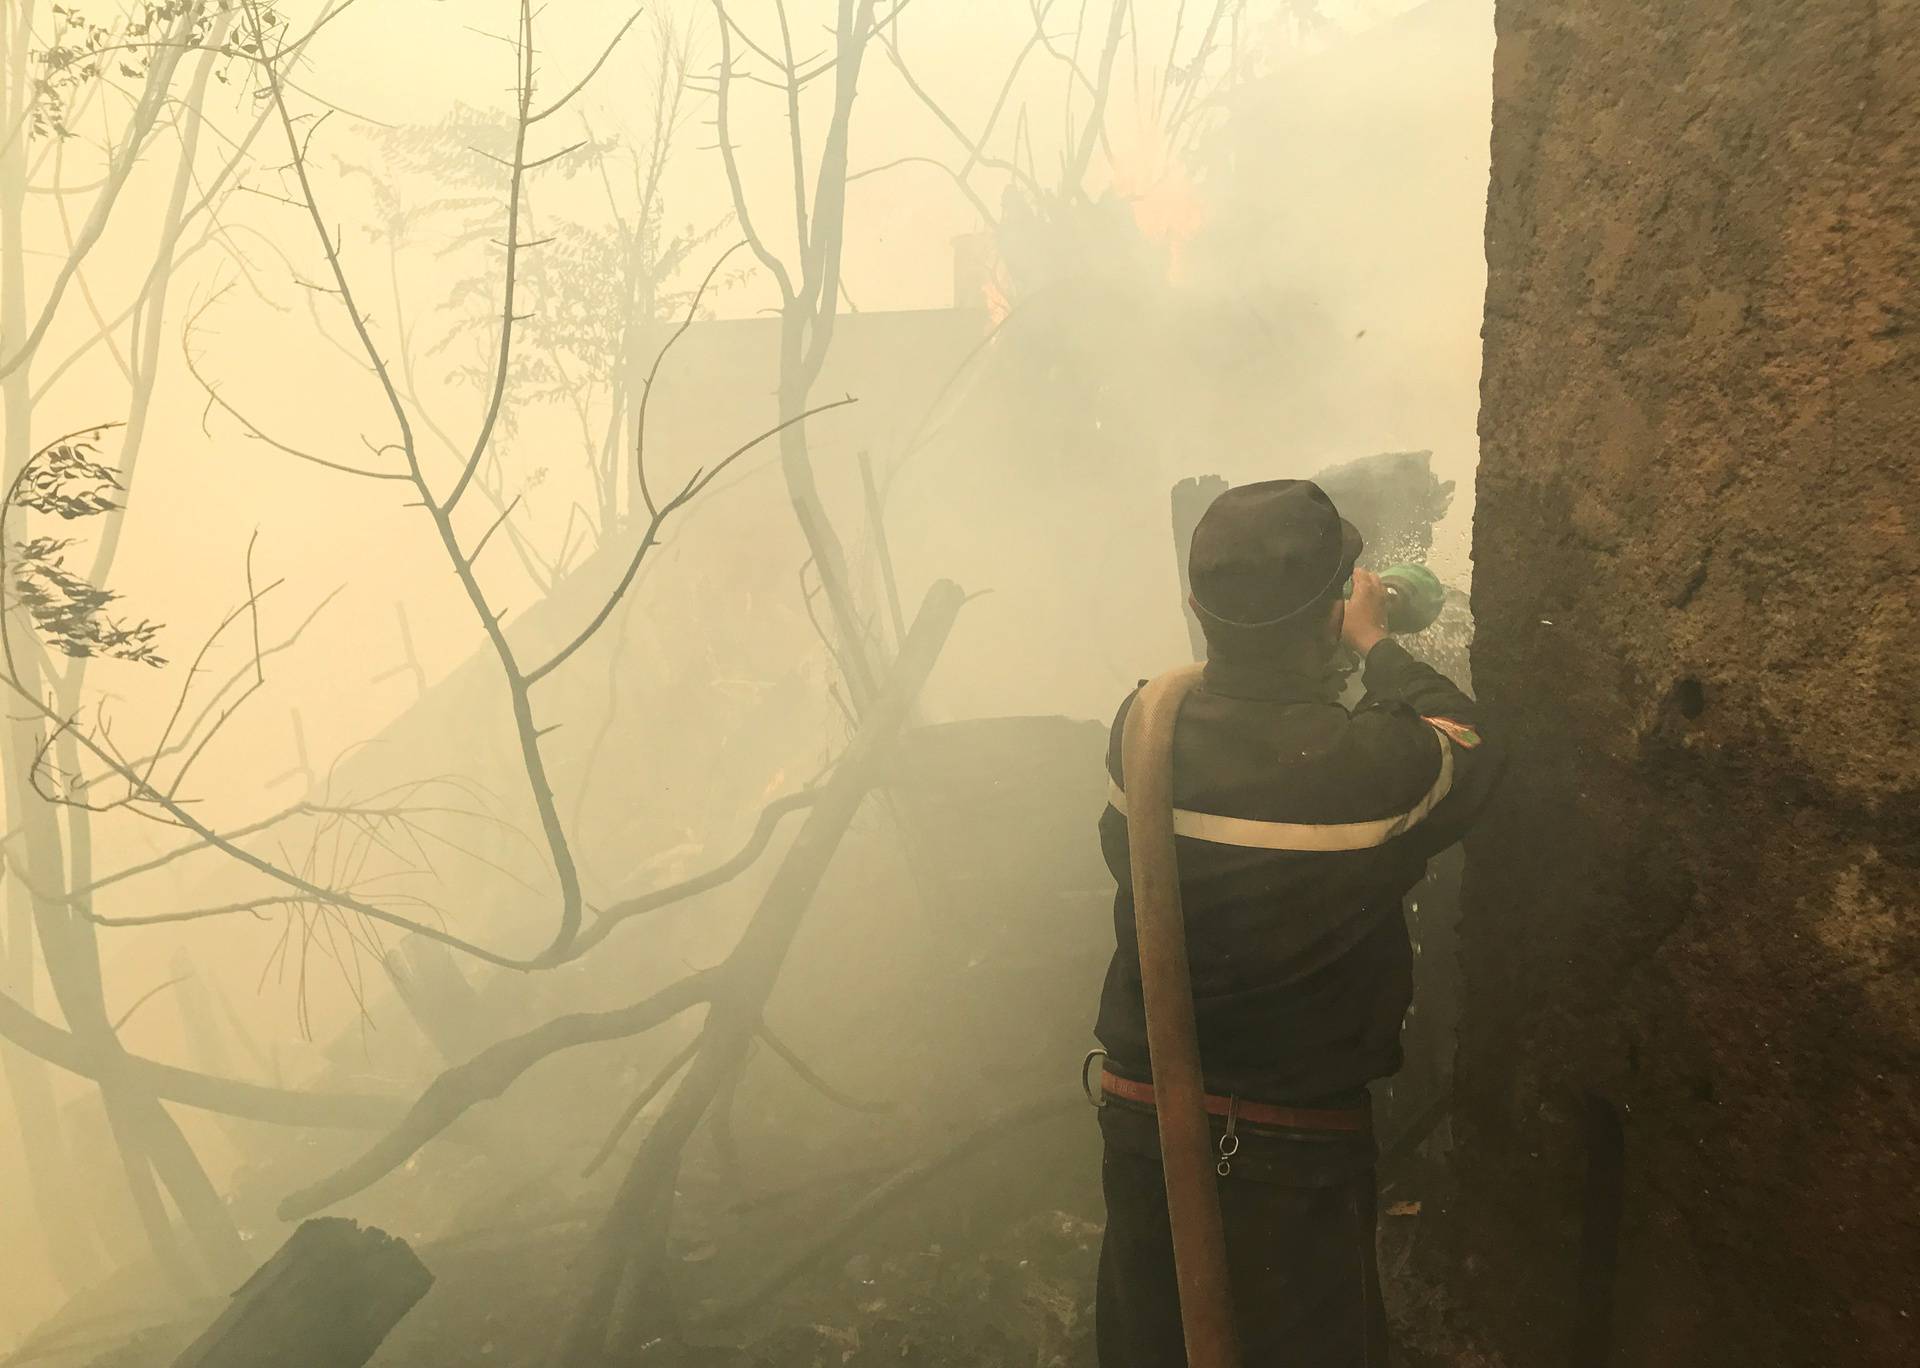 A firefighter attempt to put out a fire near a hospital in Ain al-Hammam village